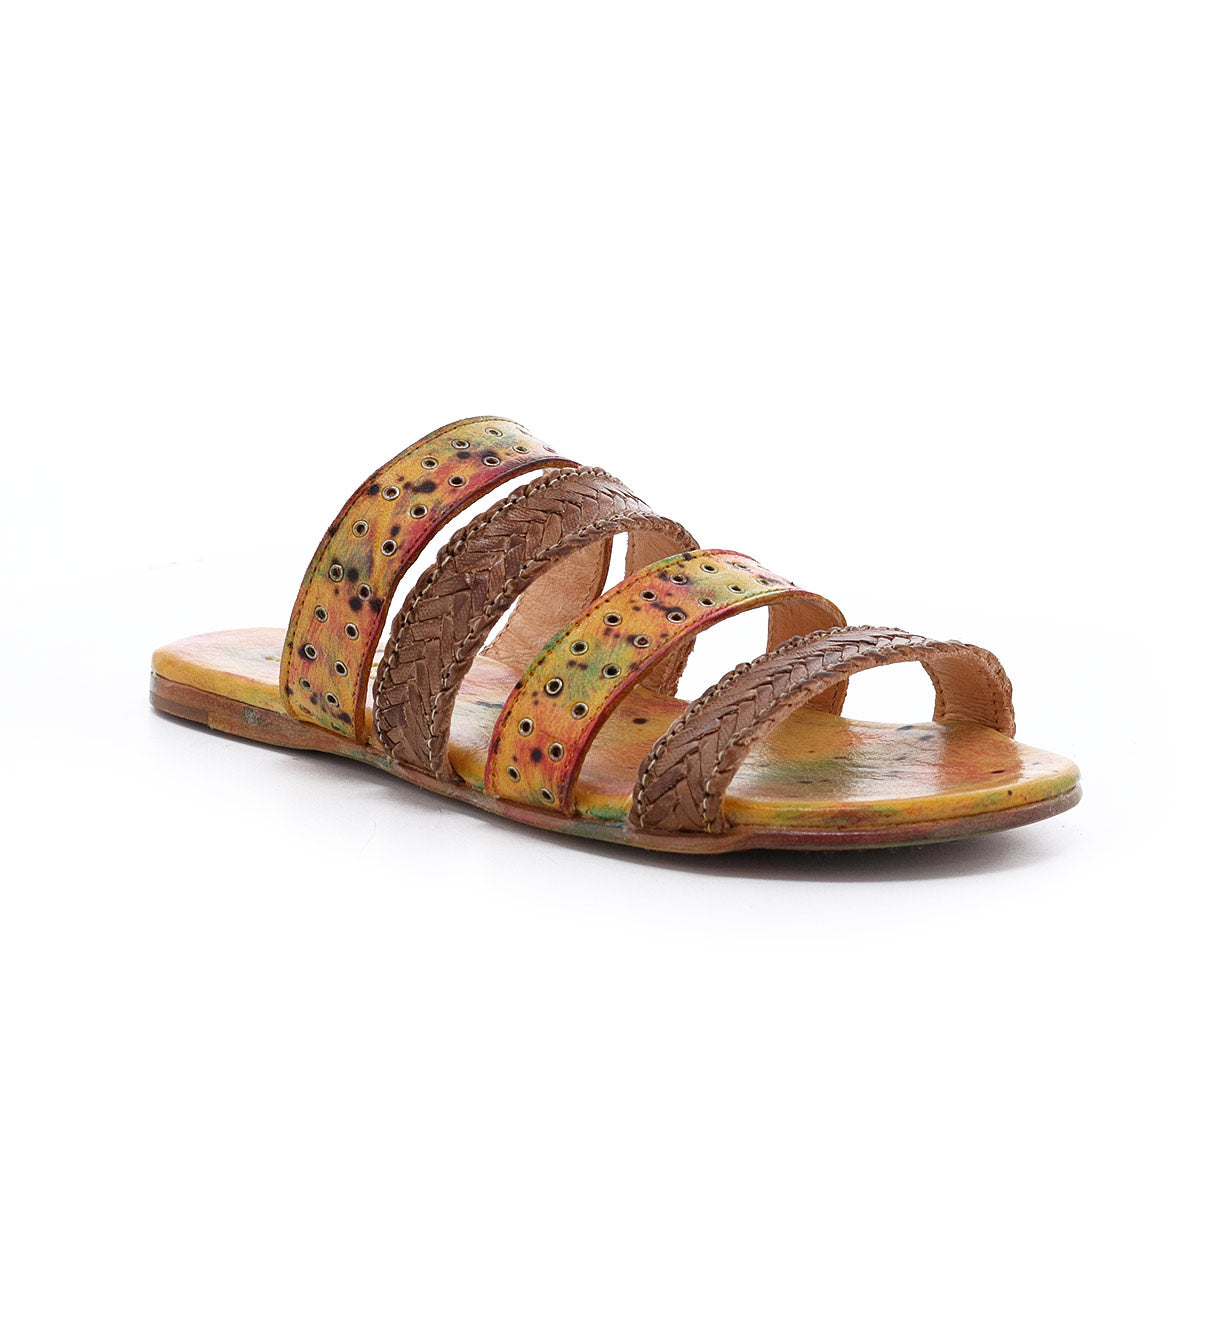 A pair of Henna women's sandals with colorful stripes by Bed Stu.